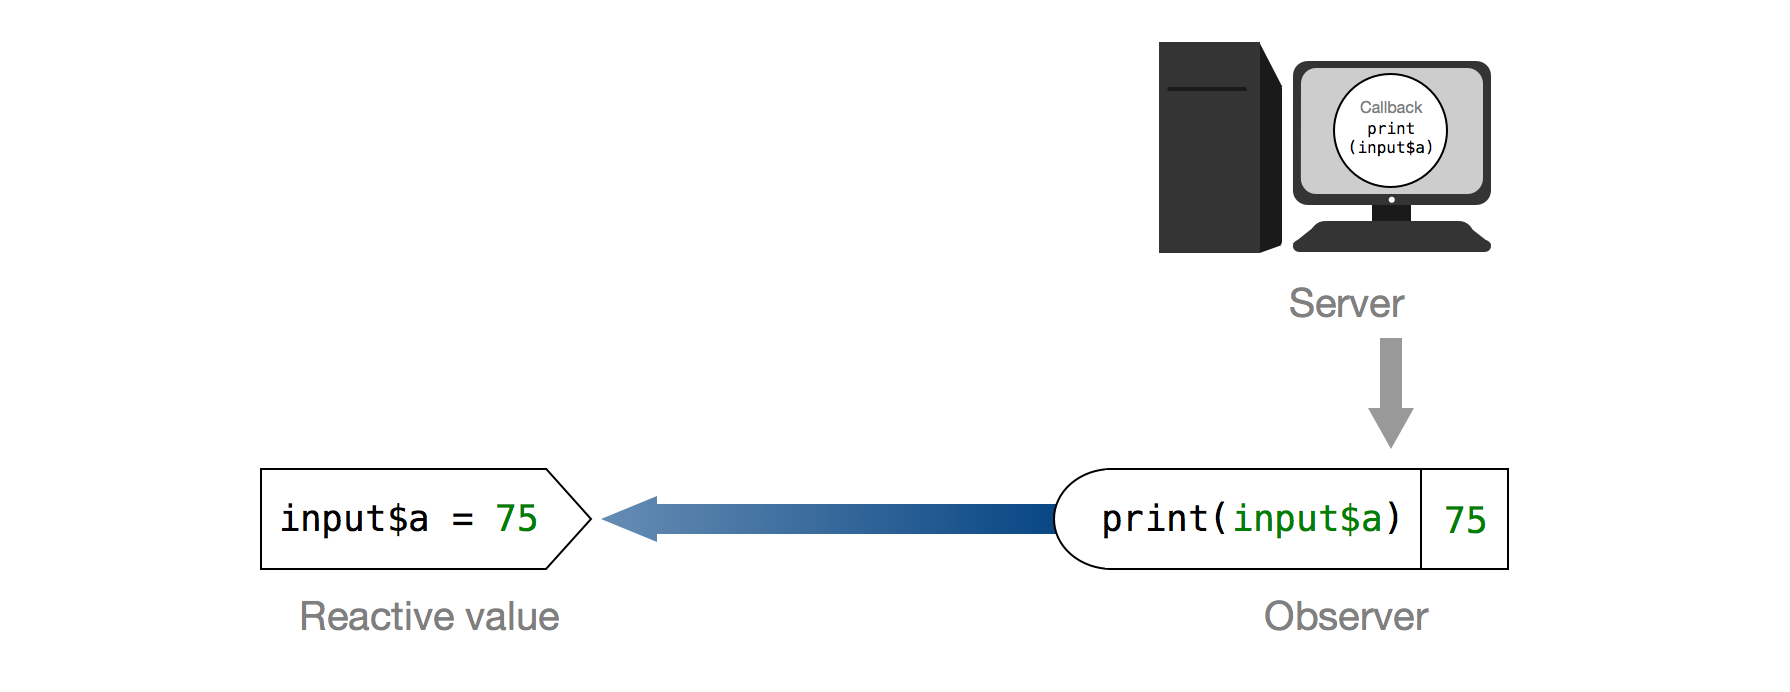 Input value input$a = 50 labeled Reactive value. Output value print(input$a) 50 labeled Observer. Image of a server with Callback print(input$a) on the server. Arrow goes from Server to Observer. Arrow goes from Observer to Reactive value.